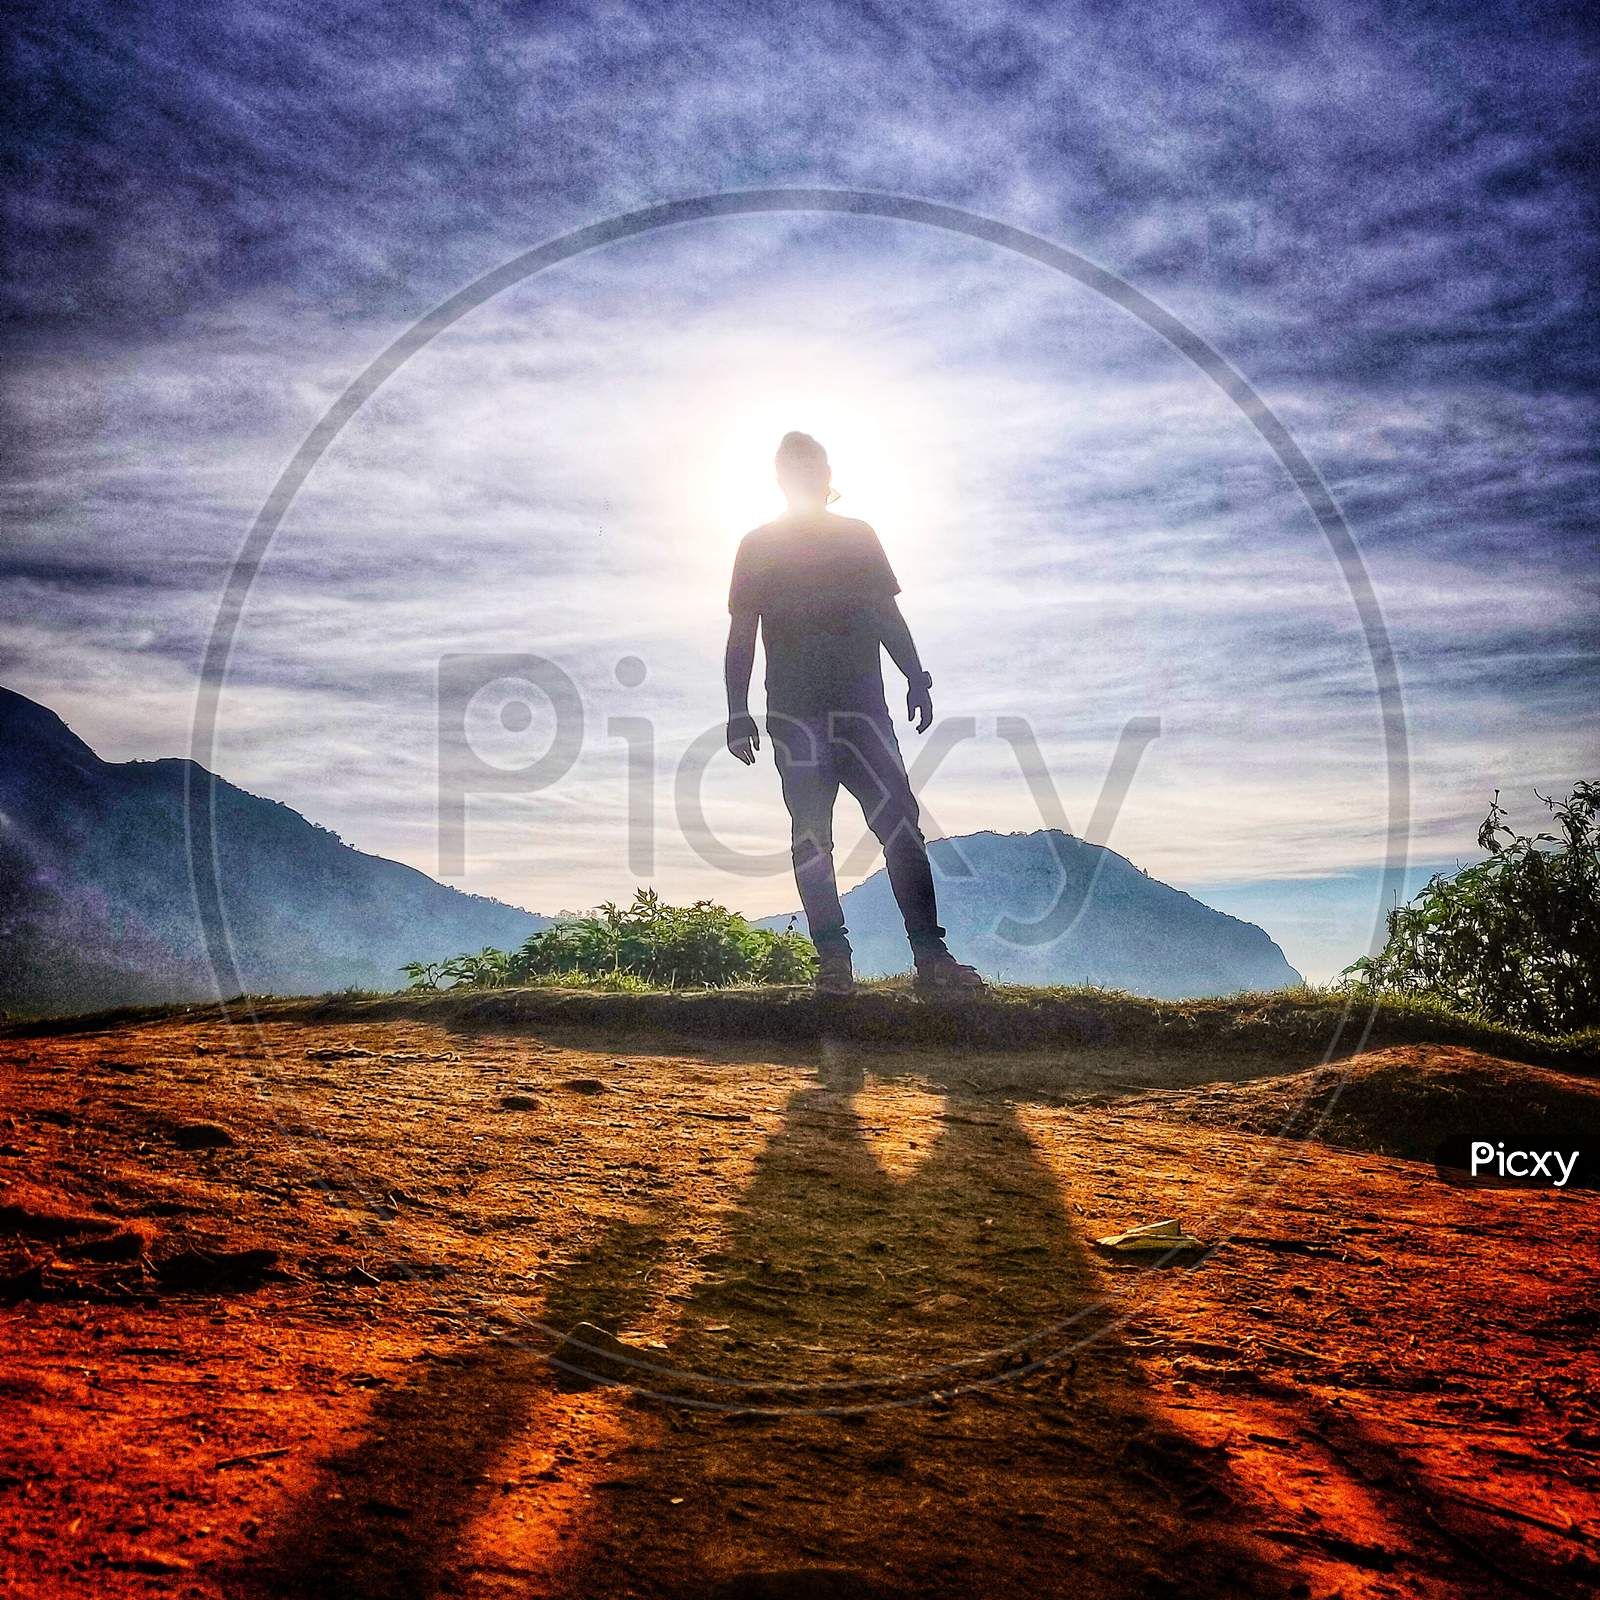 Silhouette Of Man Standing At a Terrain Cliff With Bright Sun In Background